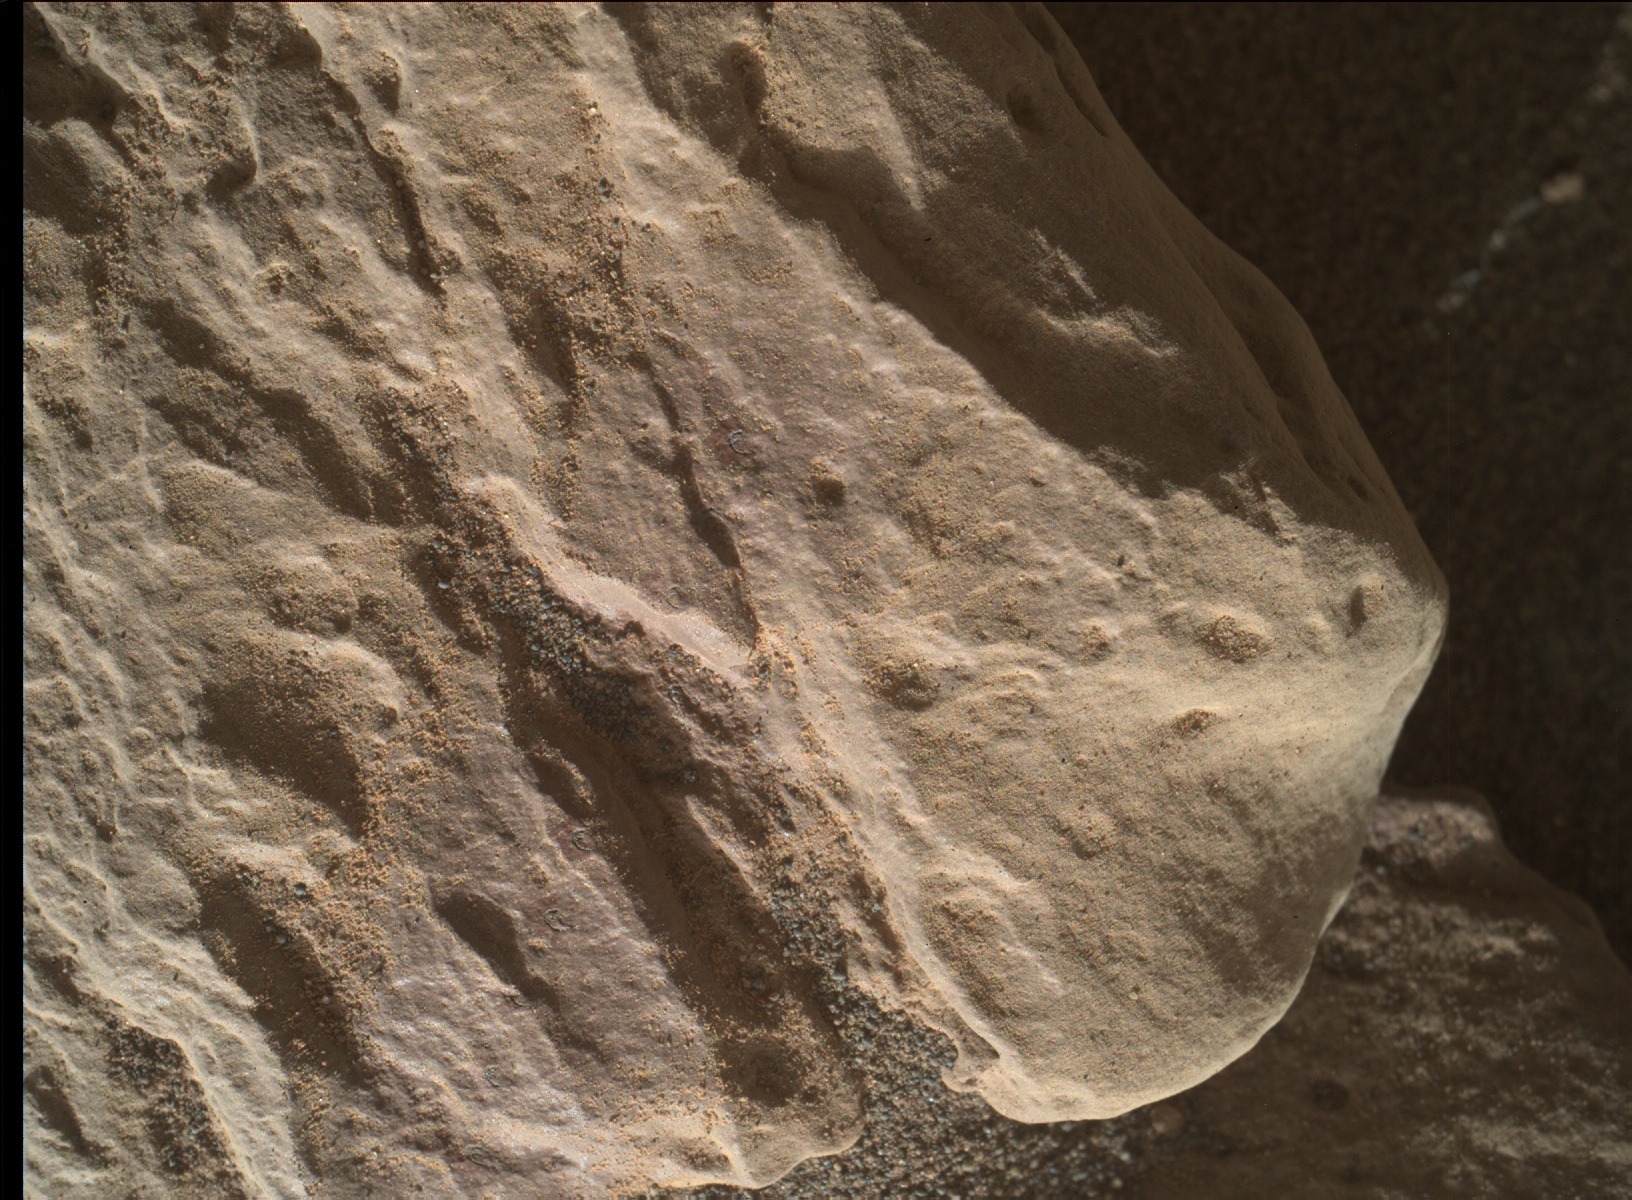 Nasa's Mars rover Curiosity acquired this image using its Mars Hand Lens Imager (MAHLI) on Sol 1947